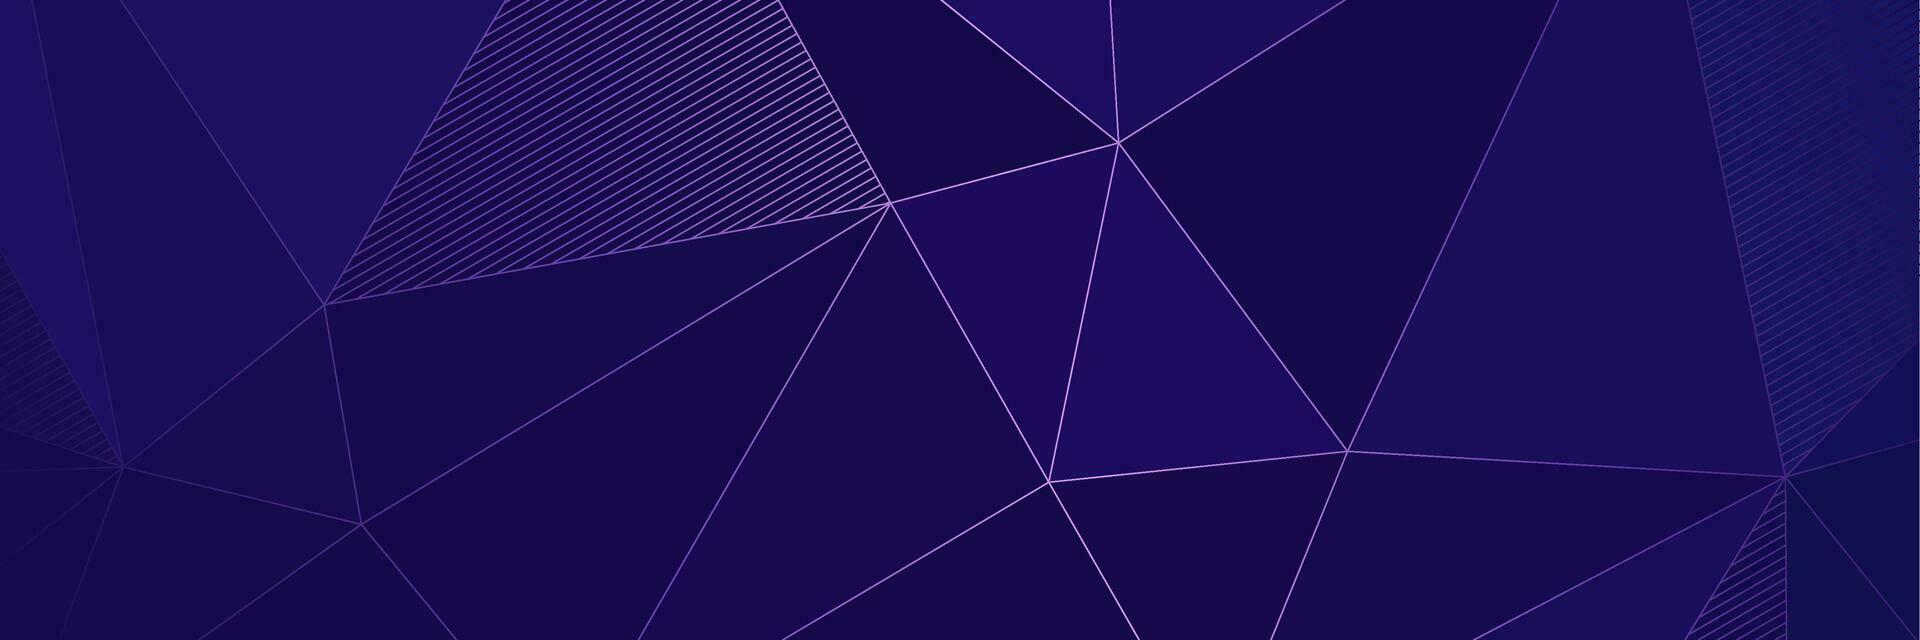 abstract purple geometric elegant background with triangles lines vector